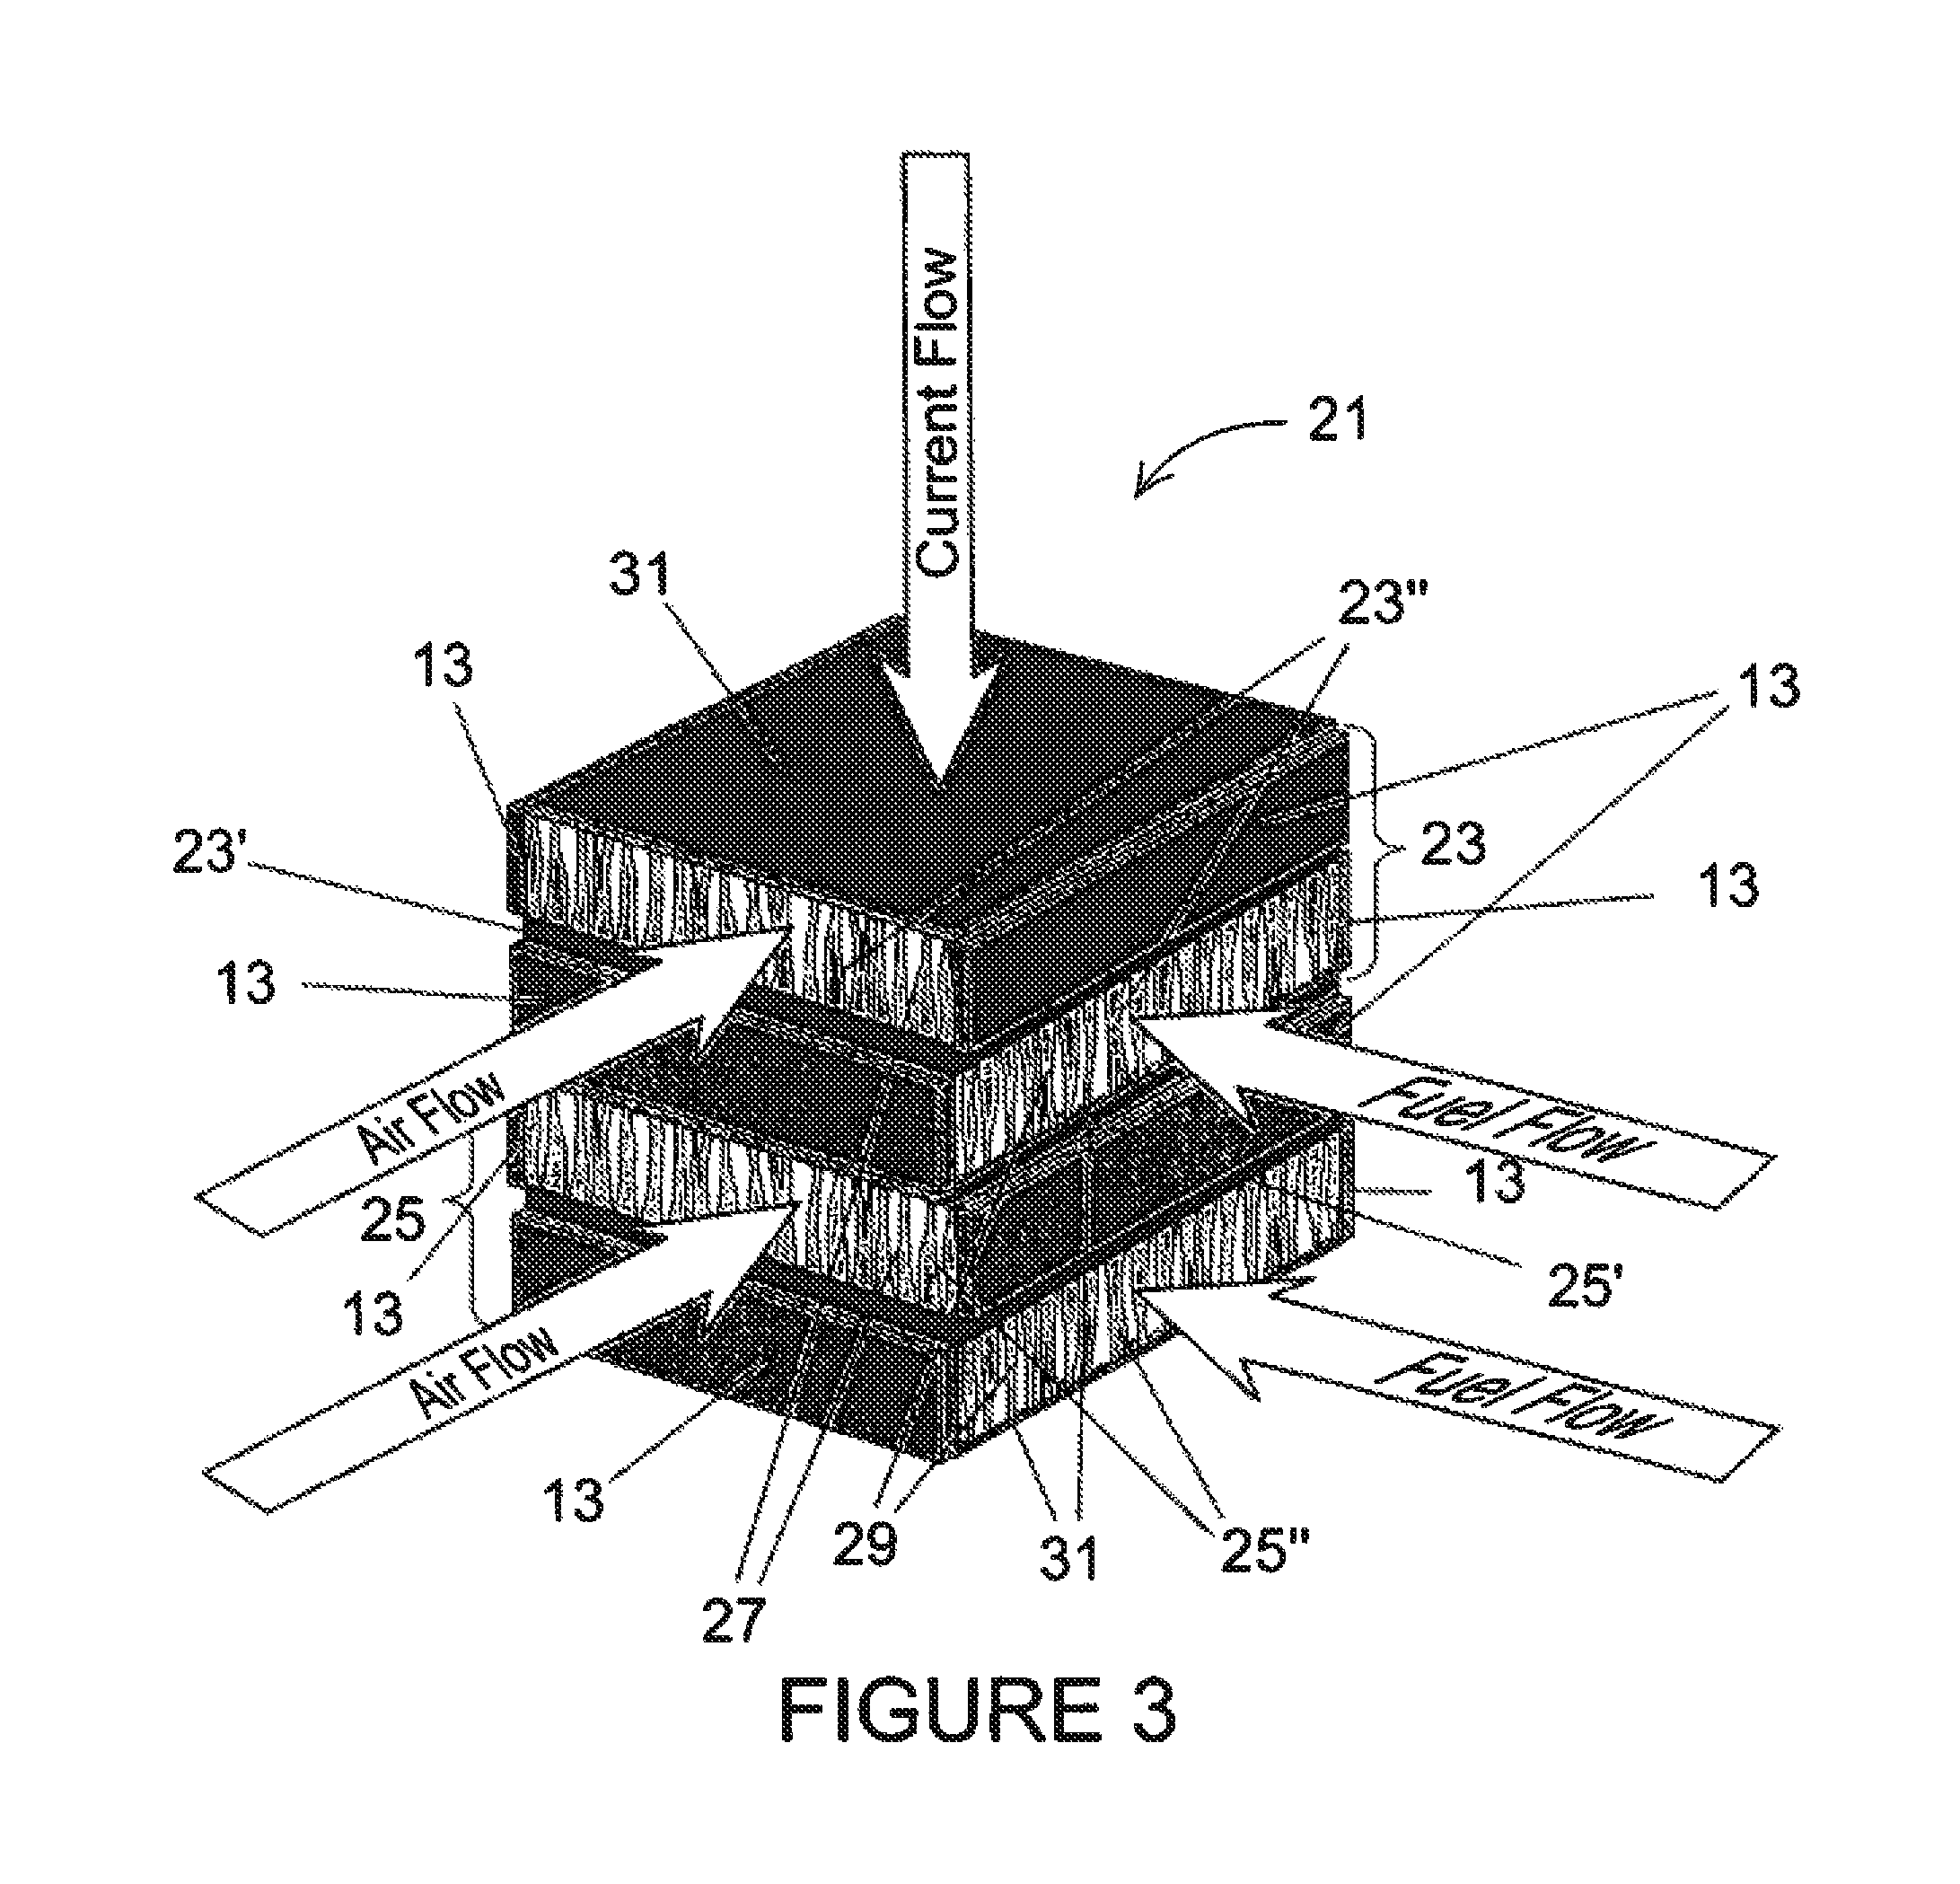 Method for making a fuel cell